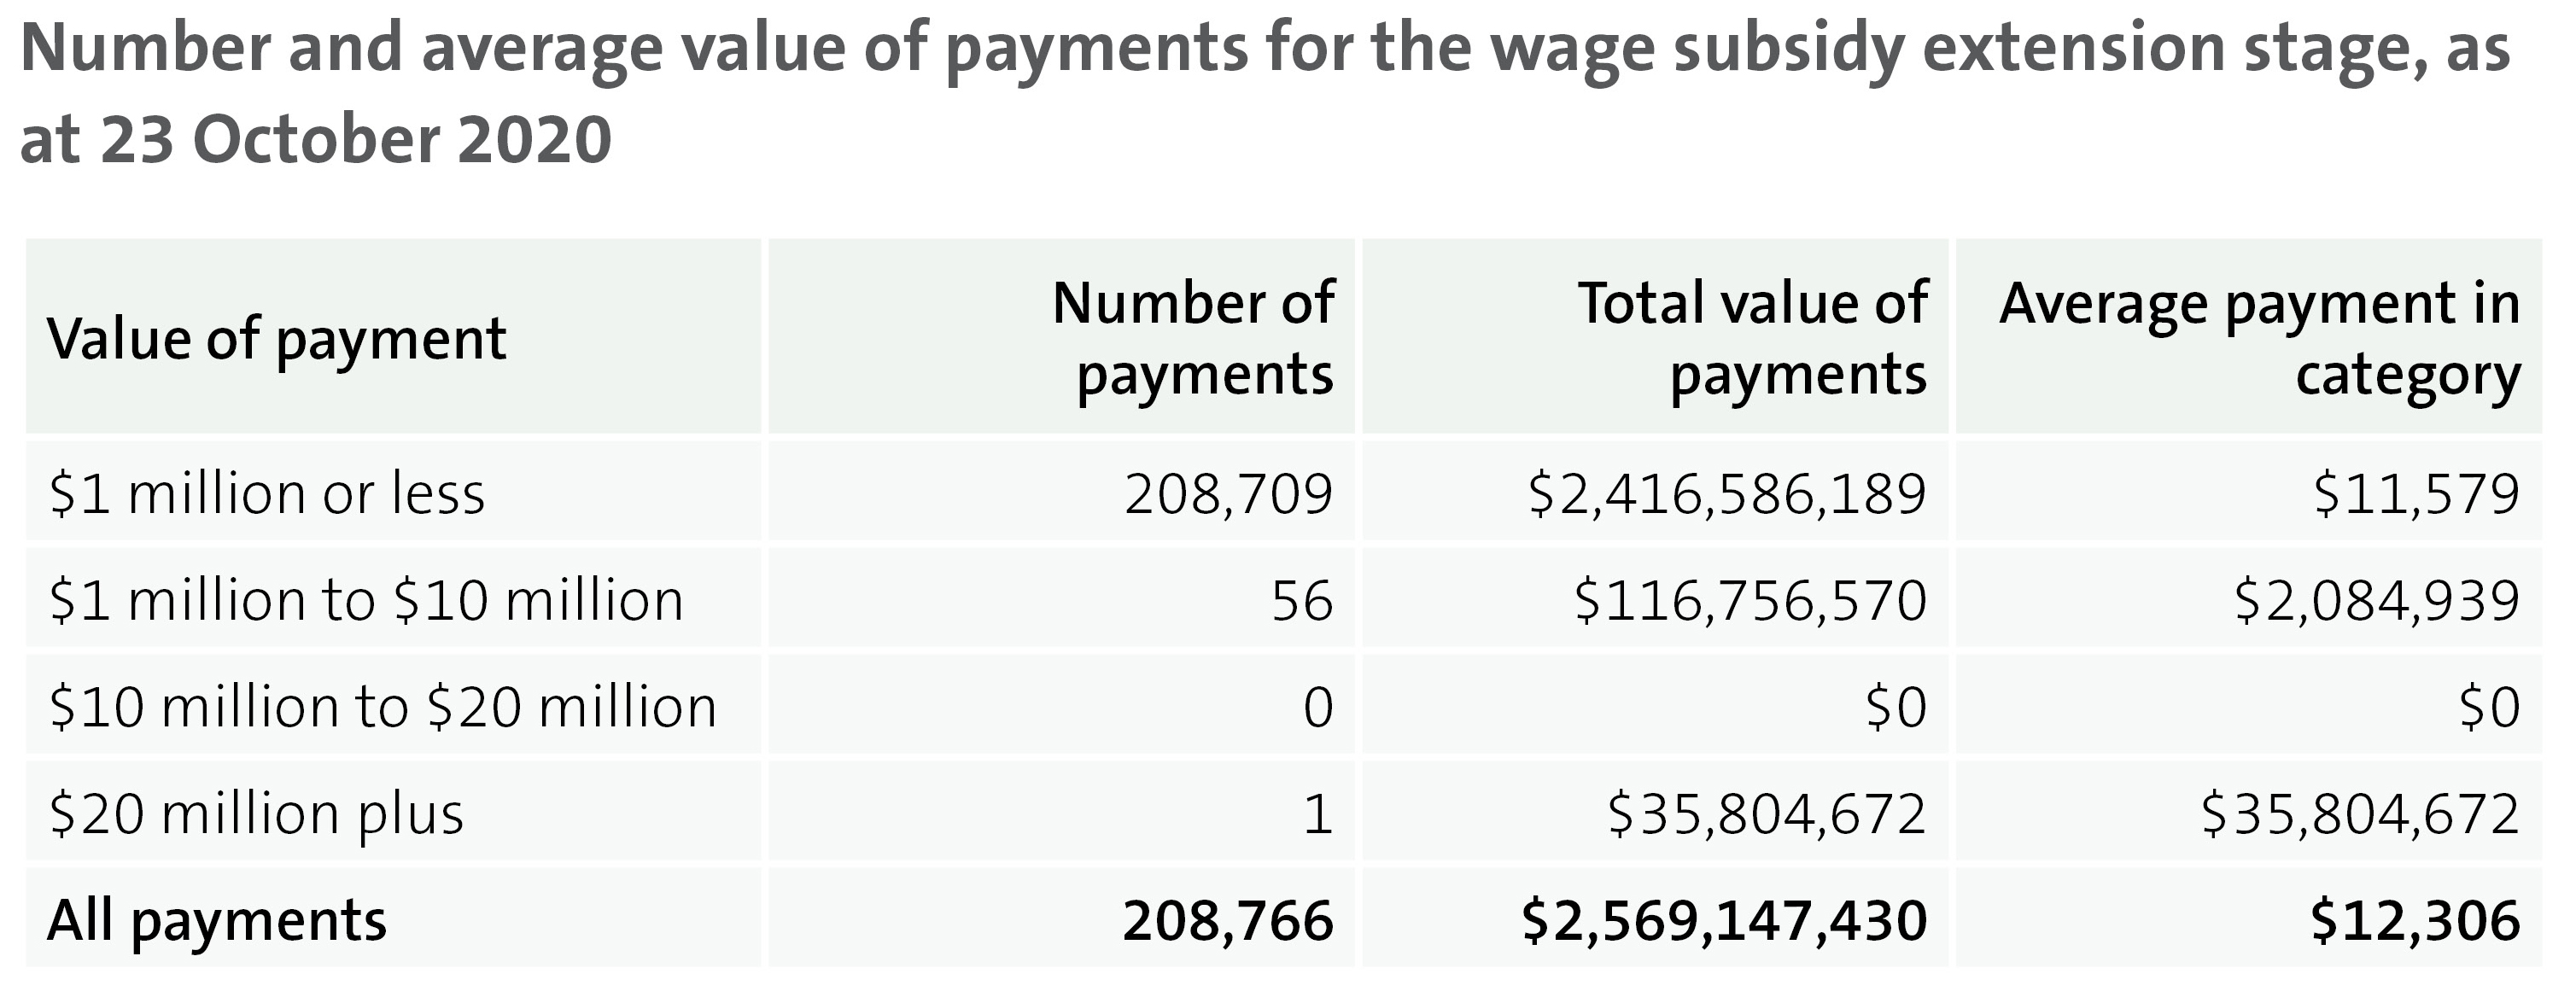 Figure 7 - Number and average value of payments for the wage subsidy extension stage, as at 23 October 2020